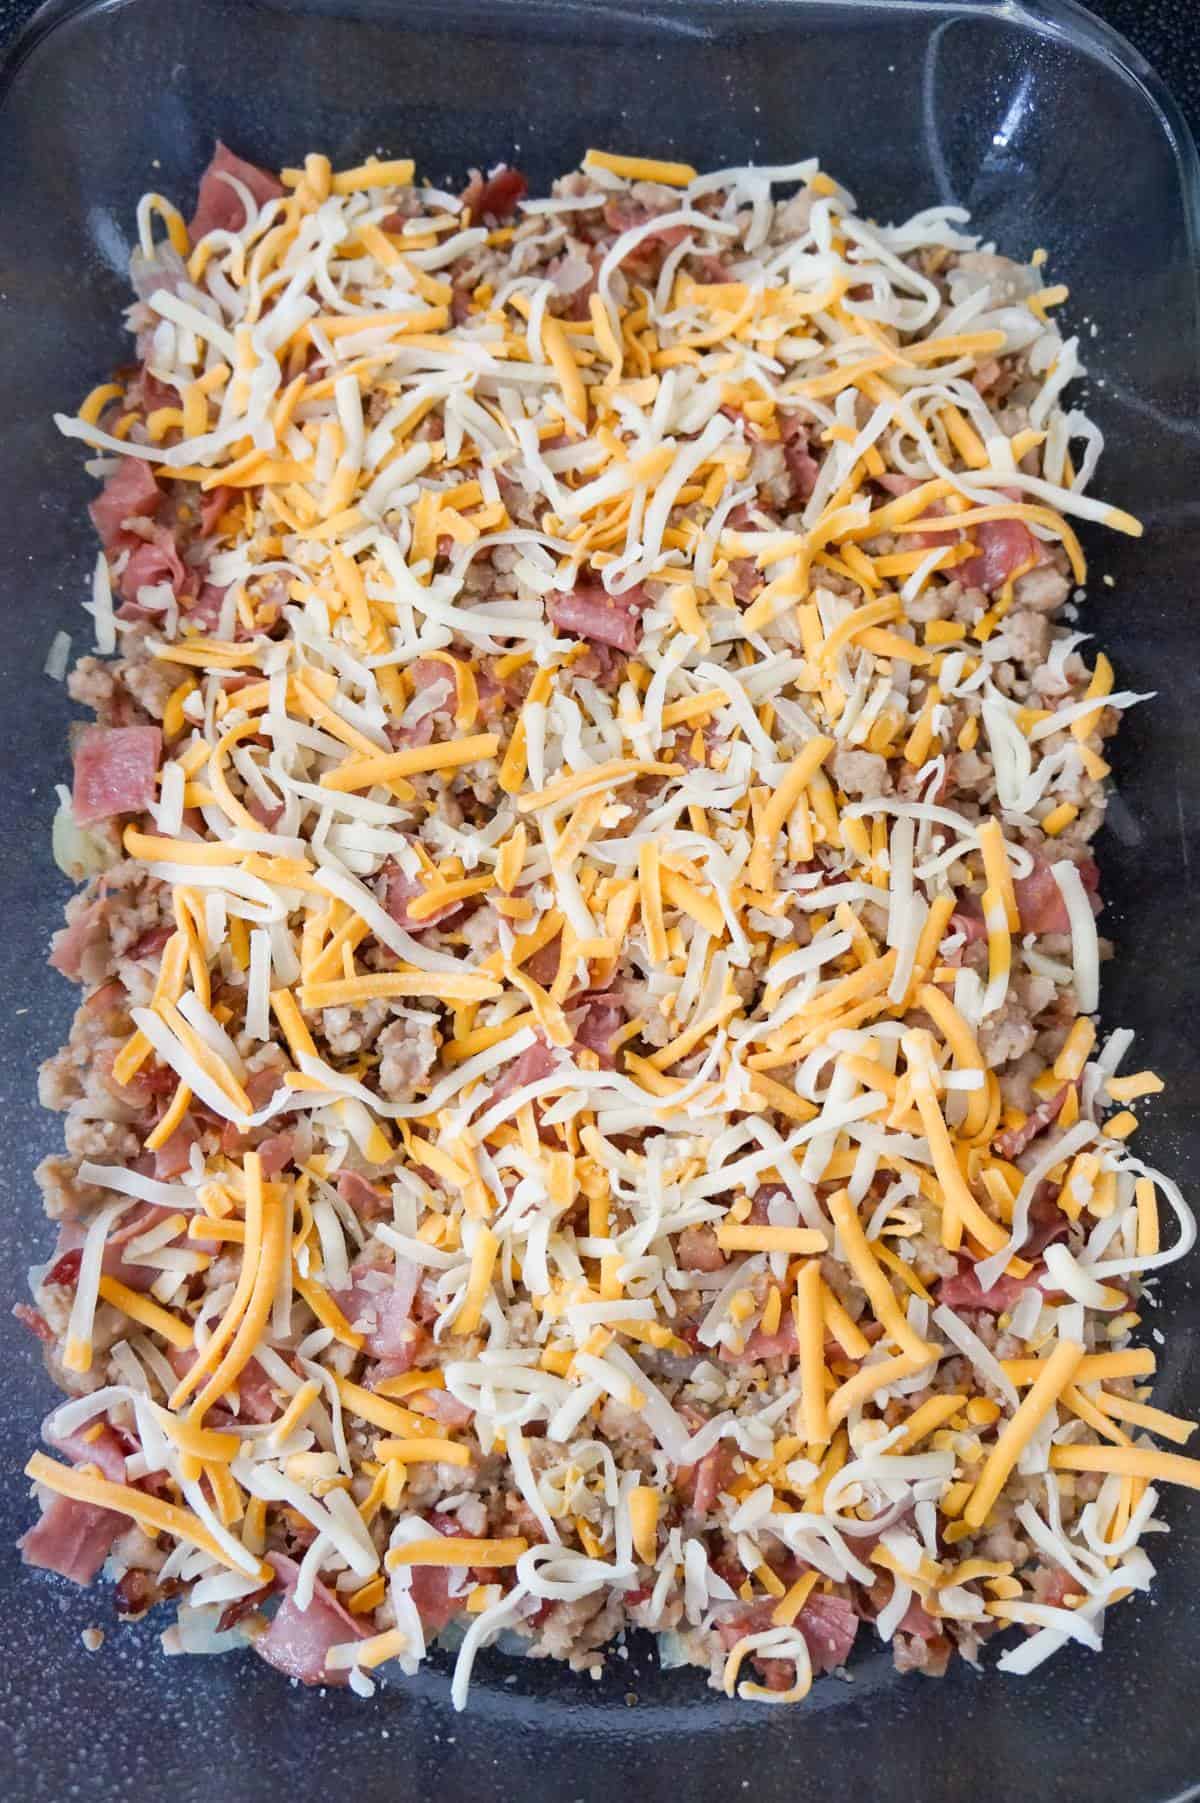 shredded cheese on top of meat mixture in a baking dish